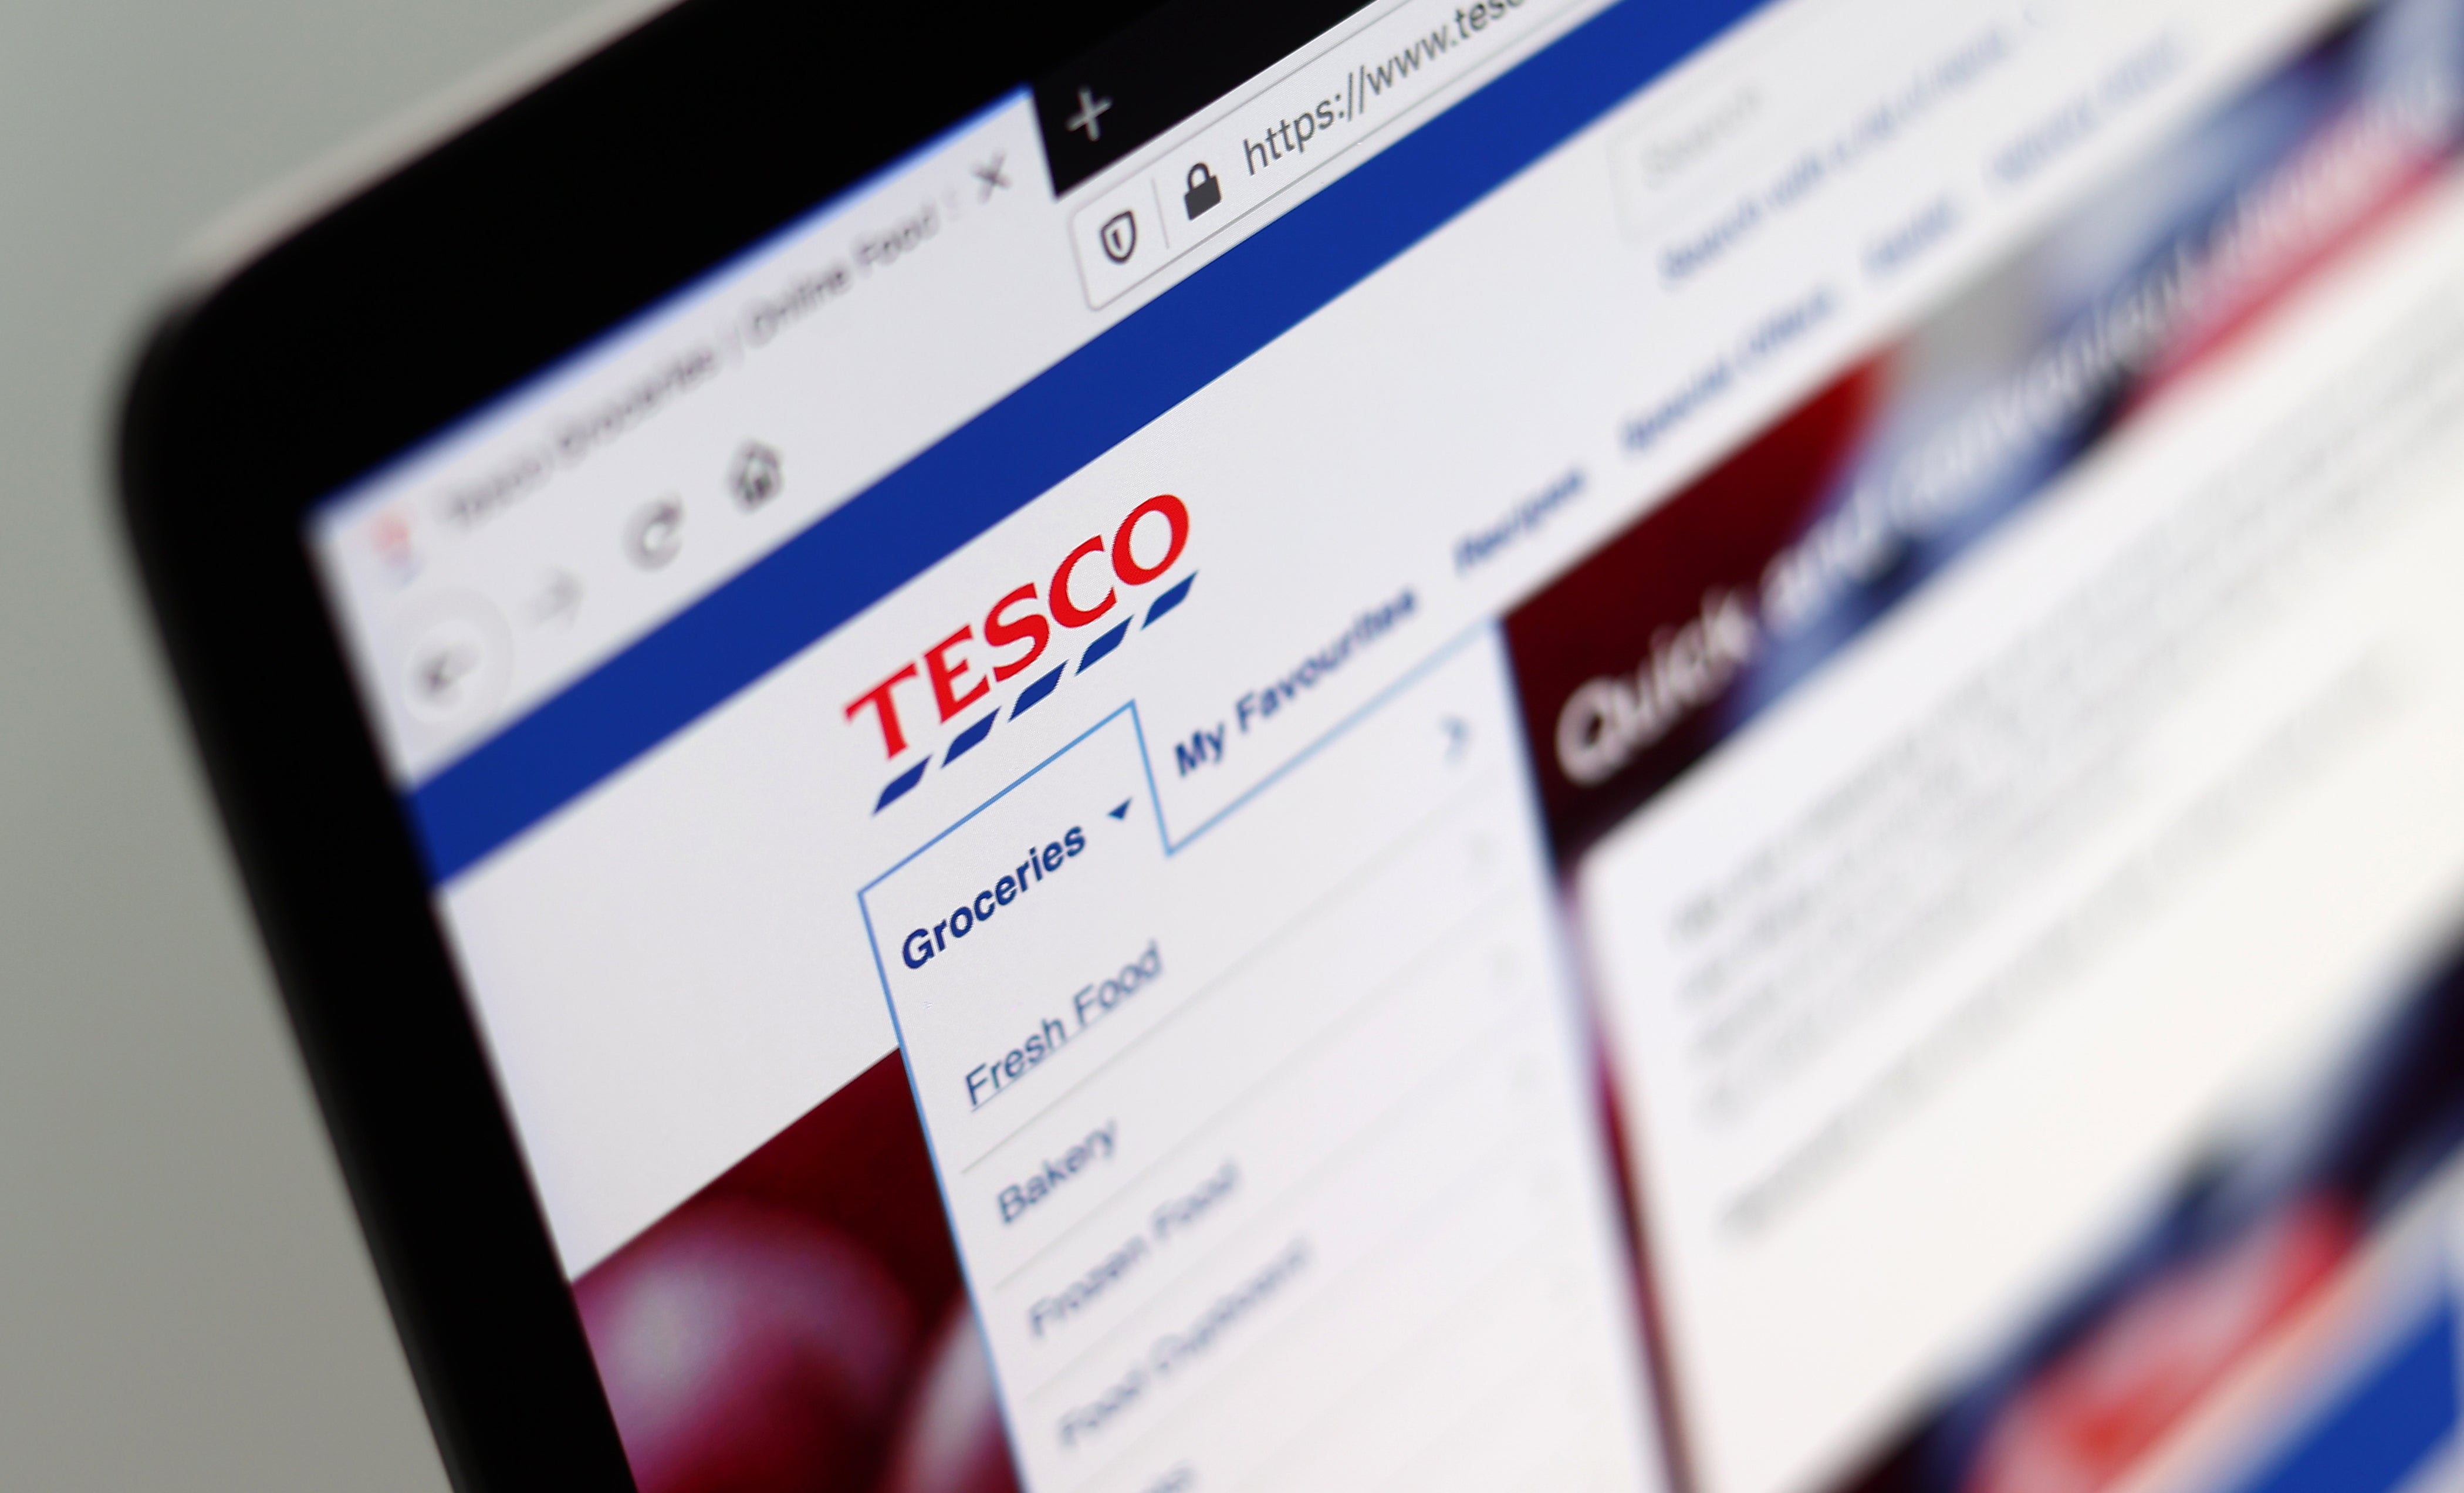 Tesco said an outage on its website and app is due to an attempt to ‘interfere’ with its systems but there is ‘no reason’ to believe customer data has been affected (Tim Goode/PA)